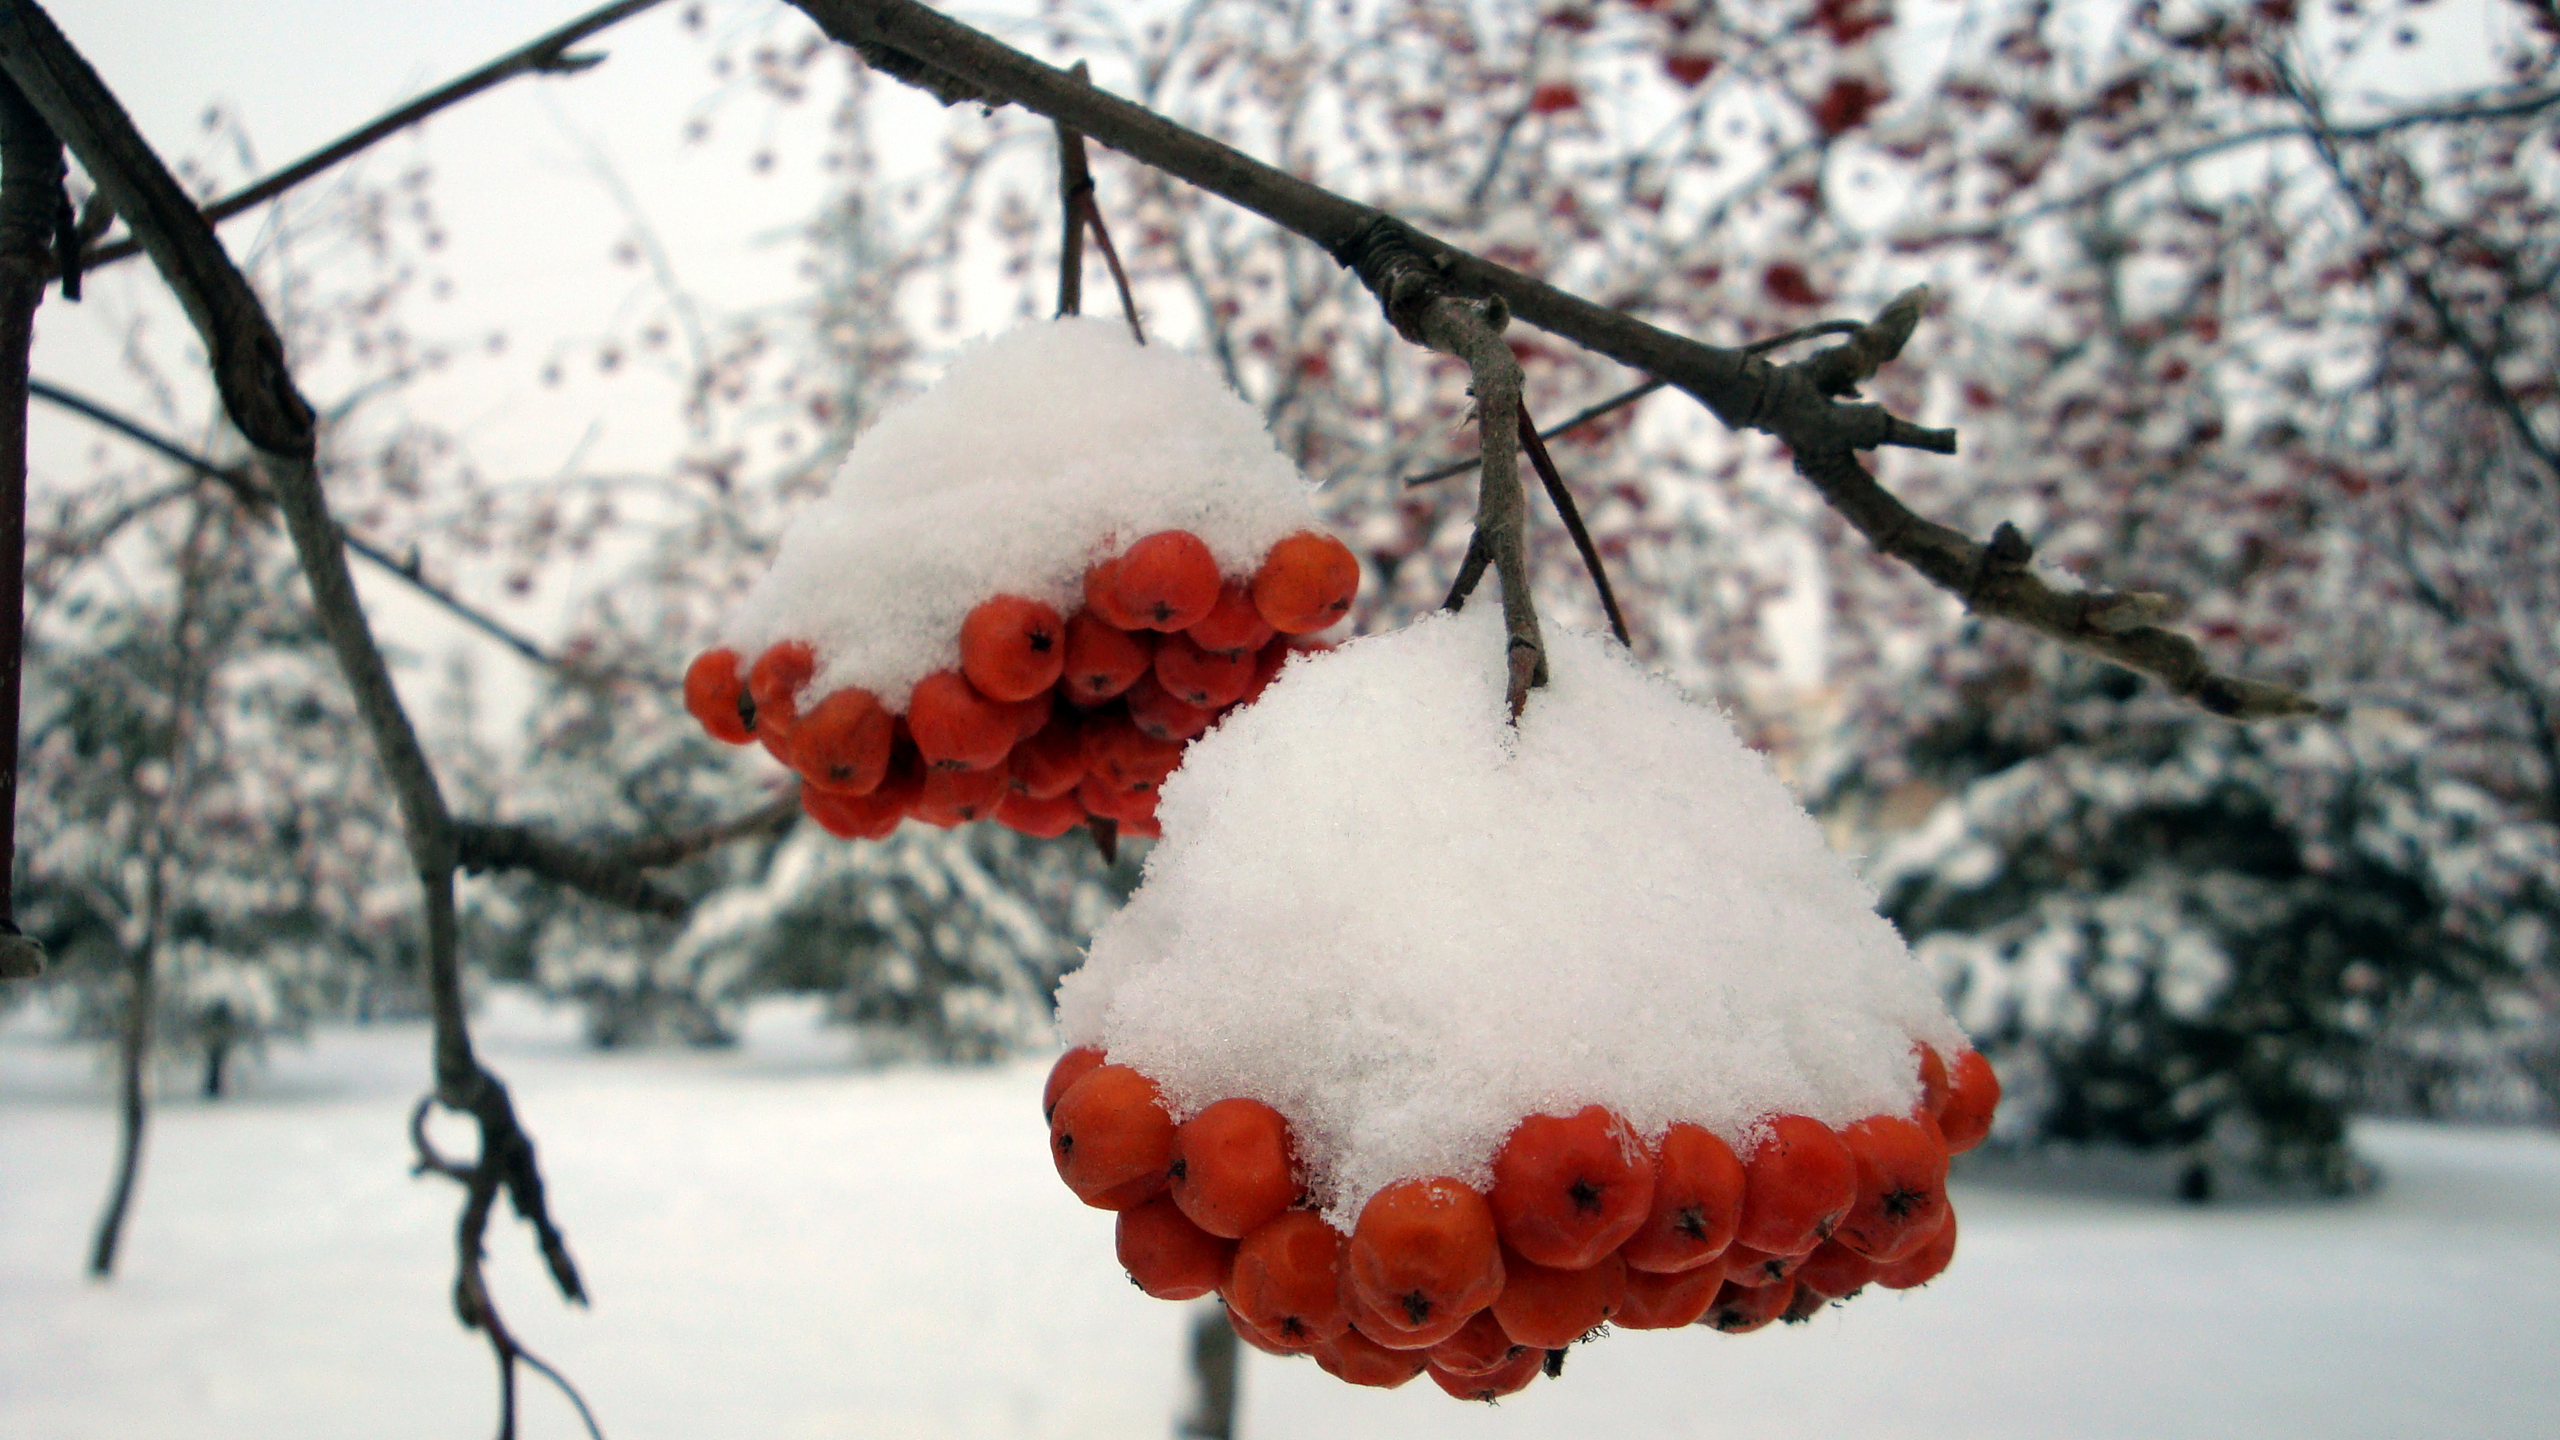 snow pictures for wallpaper,snow,branch,winter,freezing,spring